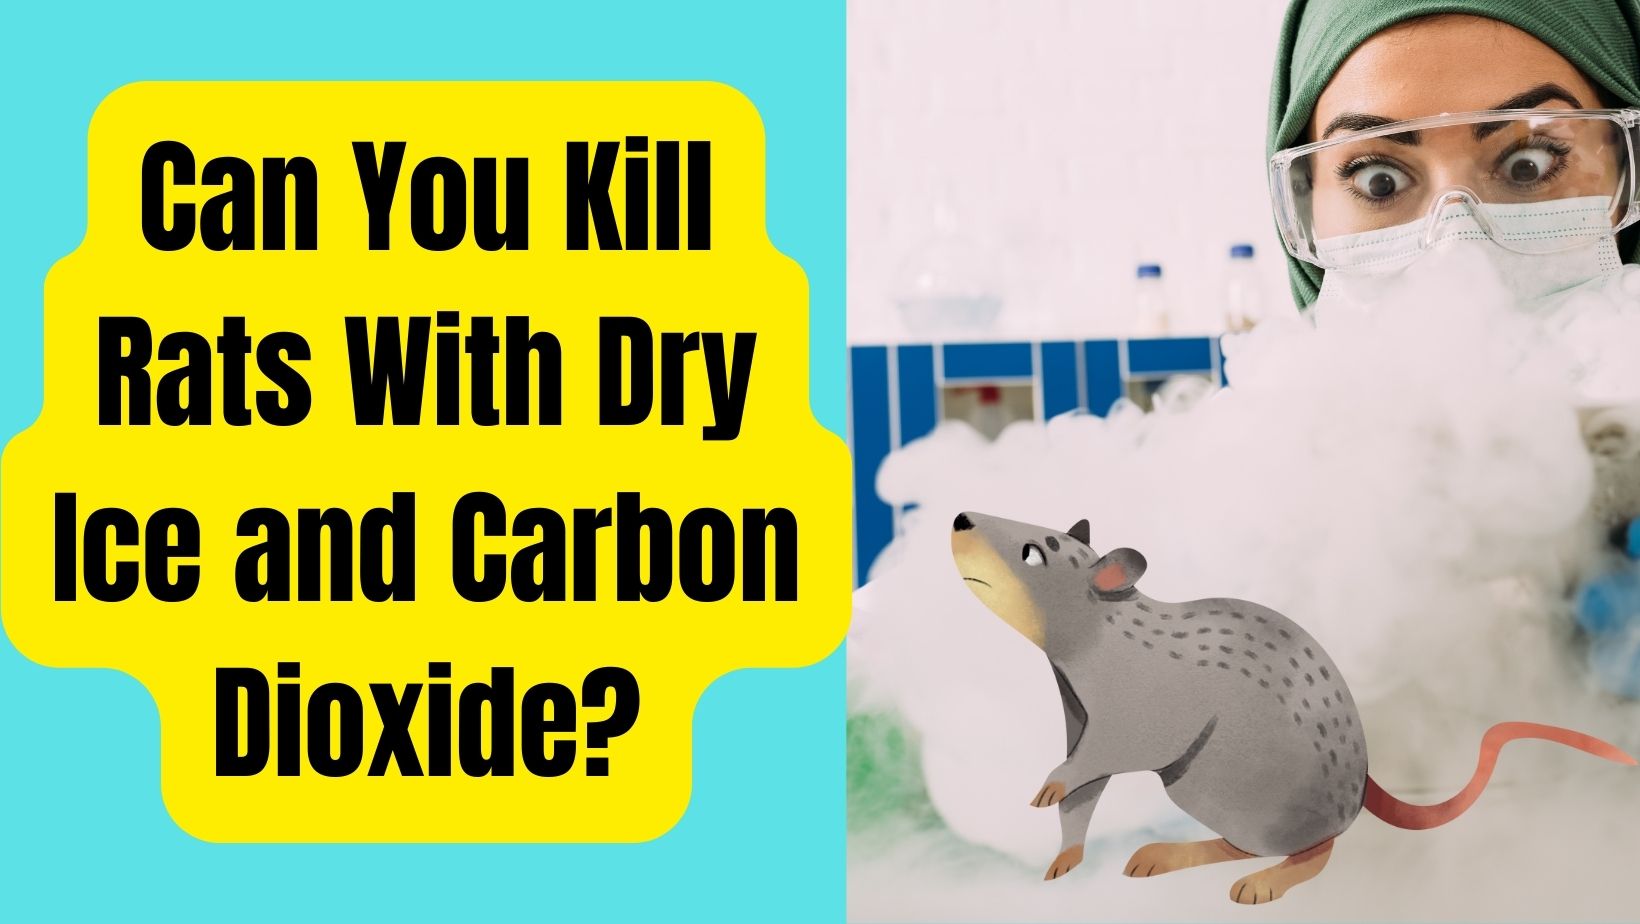 Can You Kill Rats With Dry Ice and Carbon Dioxide?